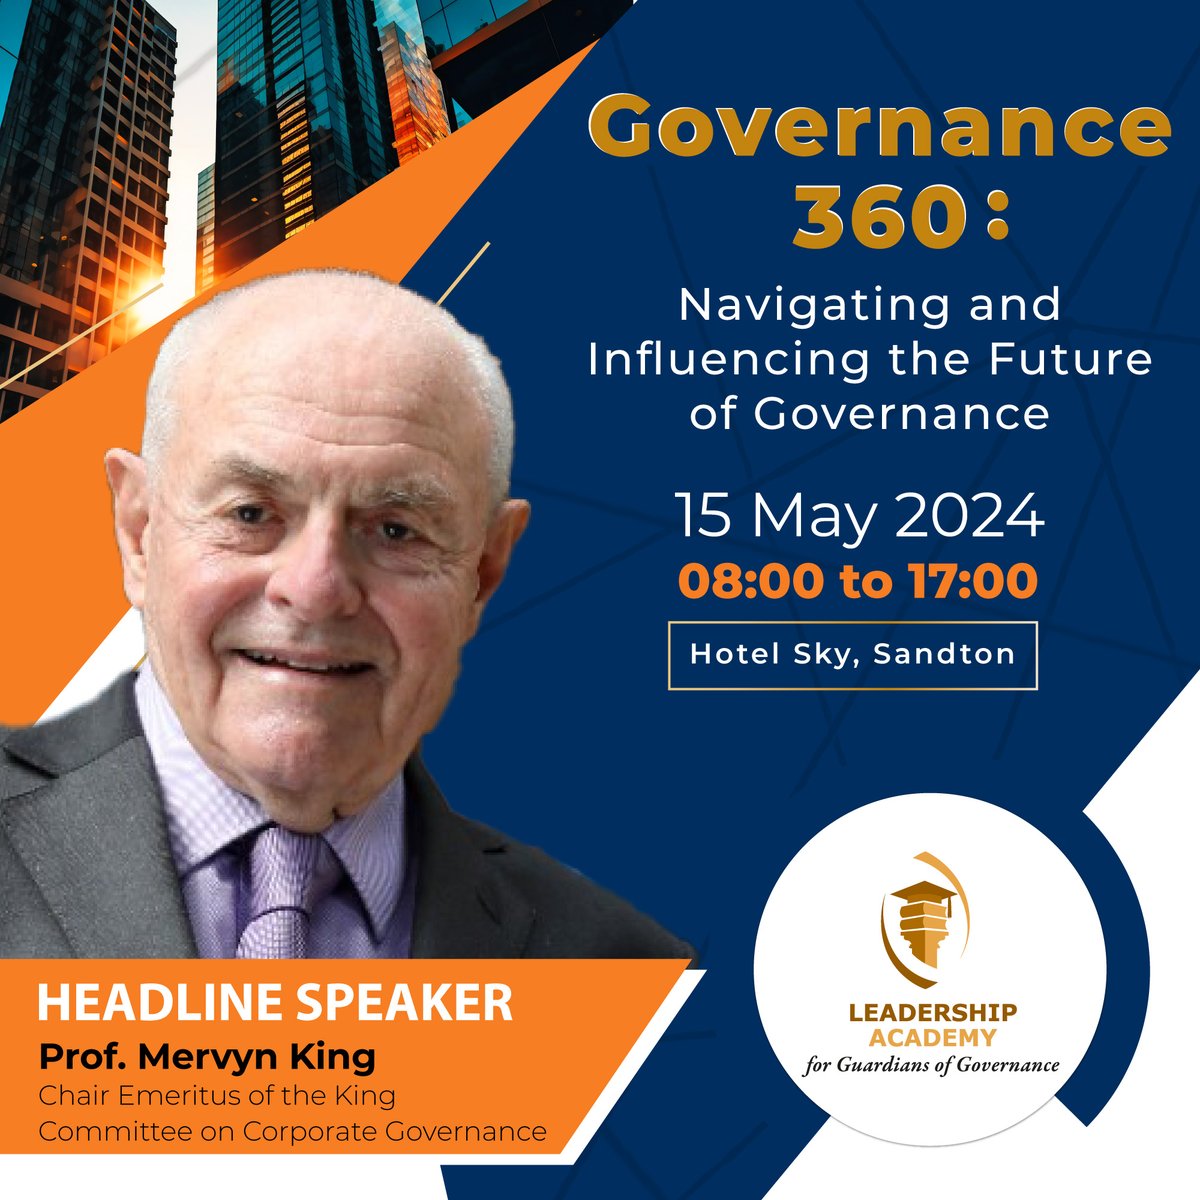 Join us in welcoming Prof. Mervyn King to our ‘Governance 360: Navigating and Influencing the Future of Governance’ Conference! Reserve your spot now with two days left for the early bird registration: evolve.eventoptions.co.za/register/gover… 

#Governance360